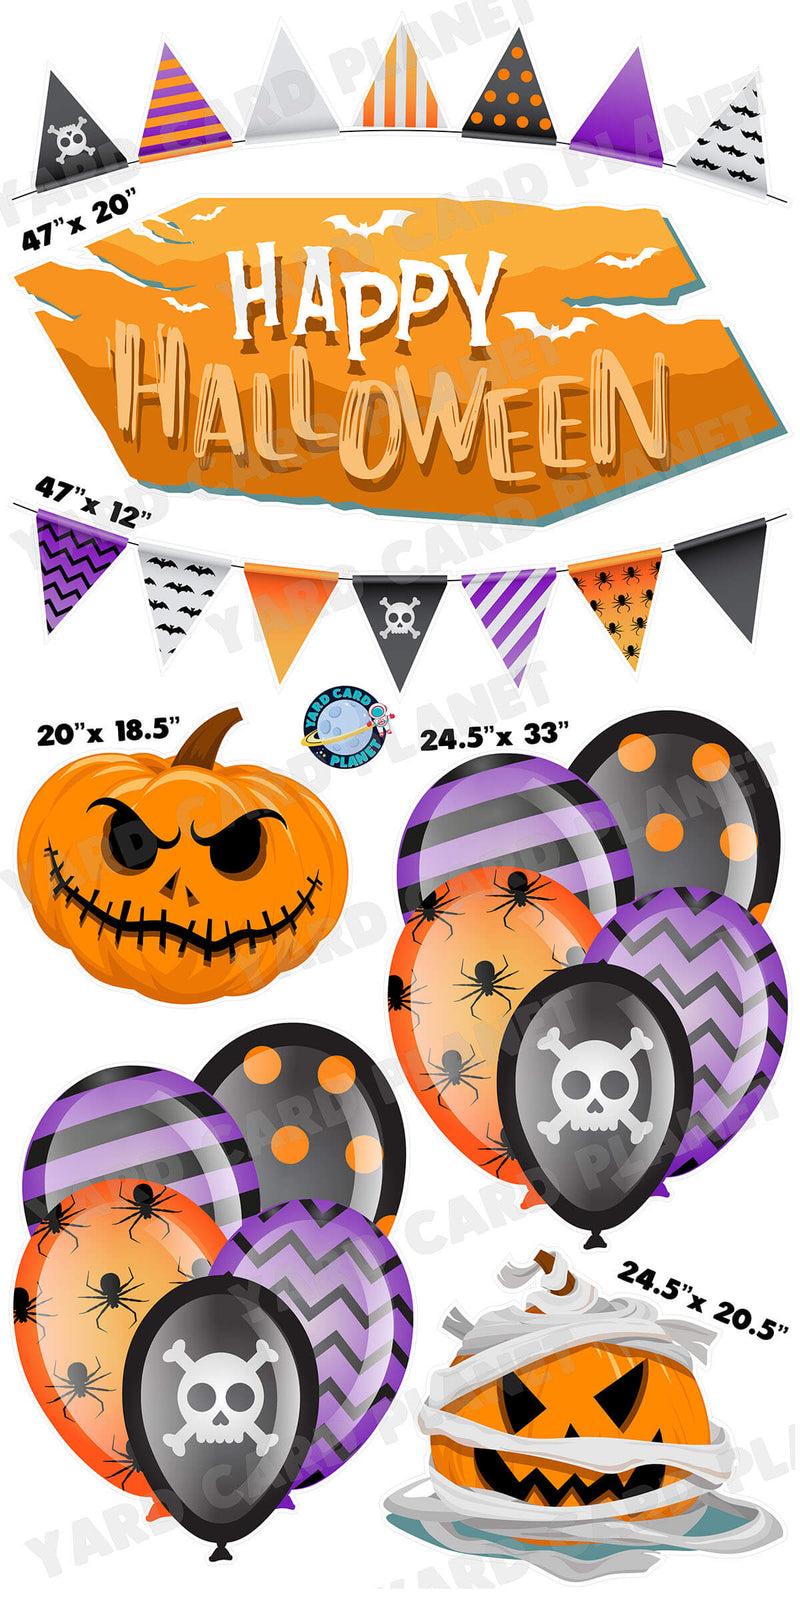 Happy Halloween EZ Quick Sign and Balloon Bouquets Yard Card Flair Set